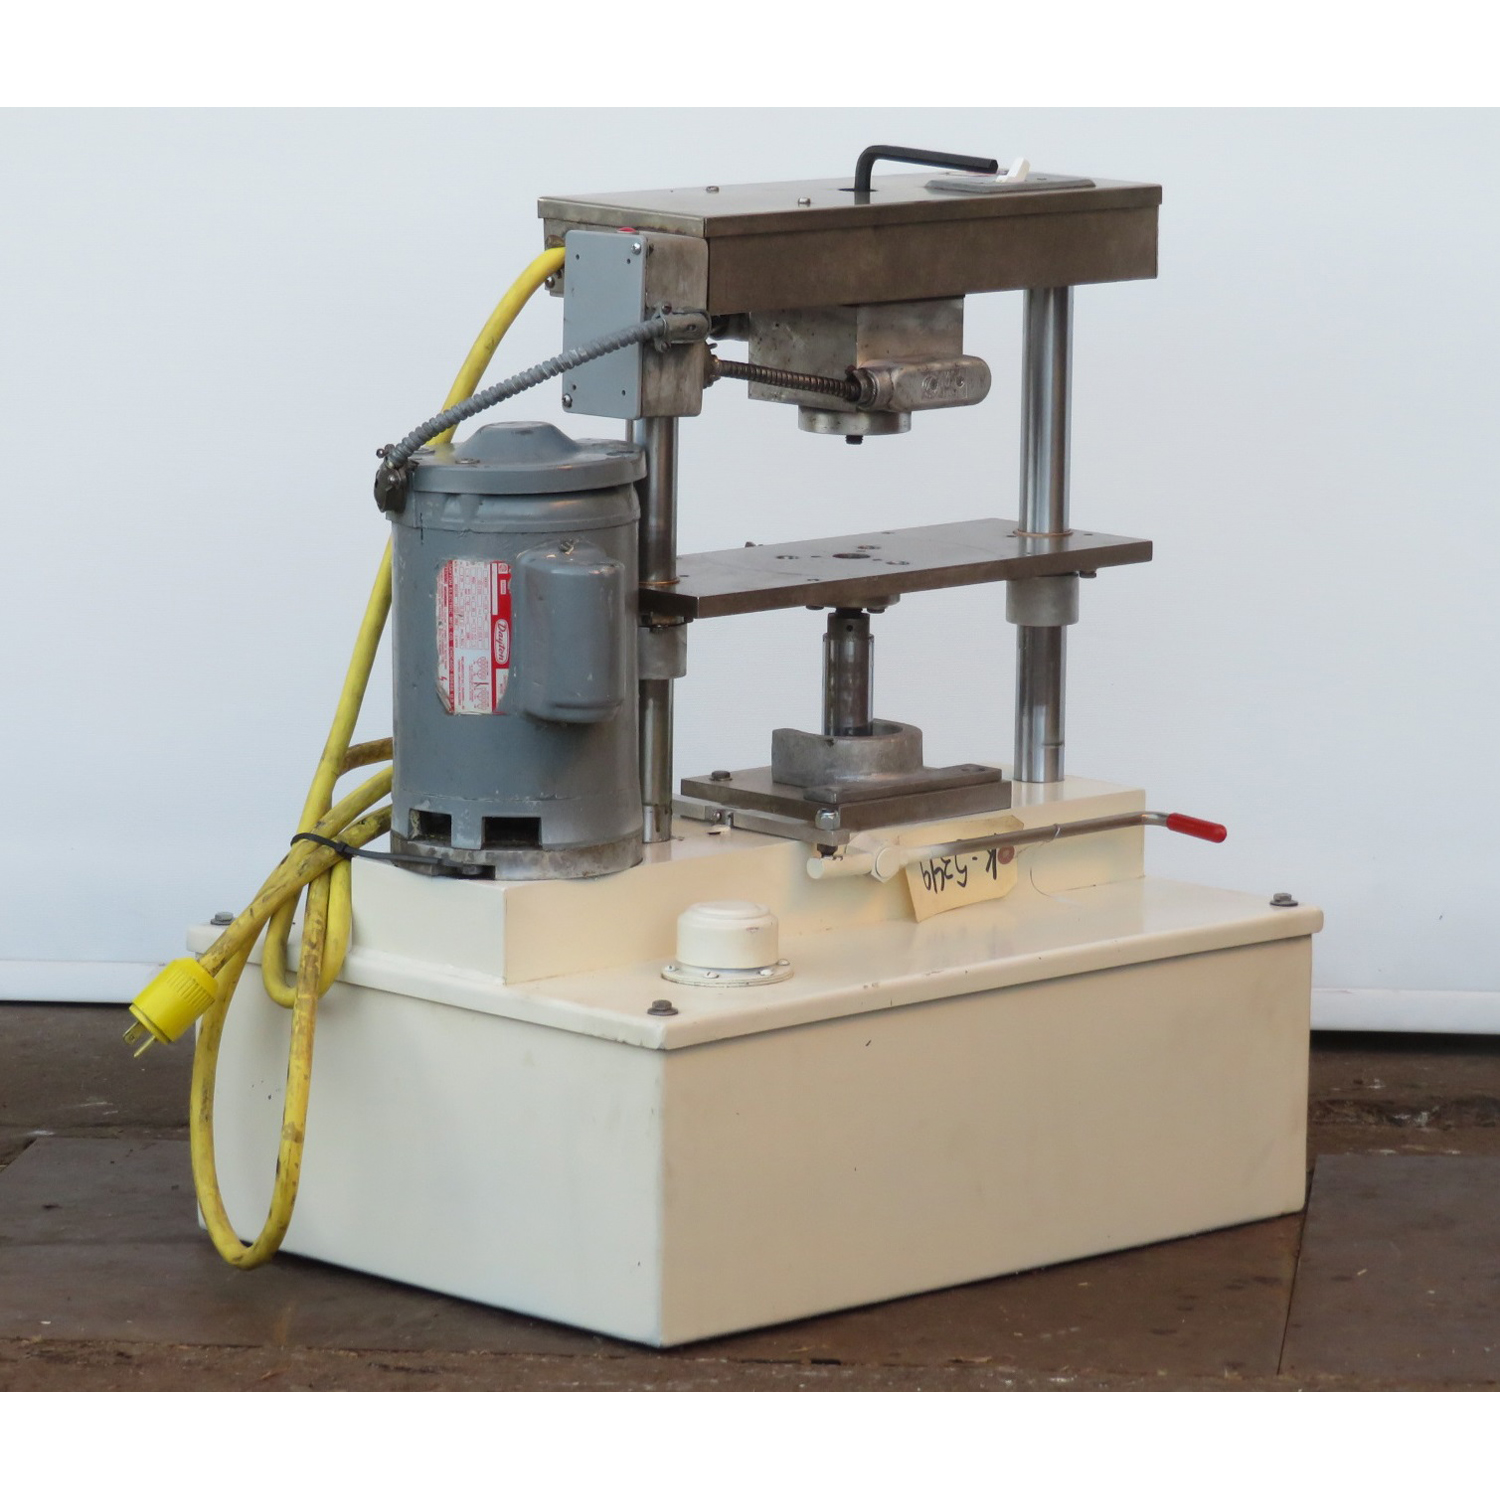 Comtec 1100 Hydraulic Pie Press, Used Excellent Condition image 3